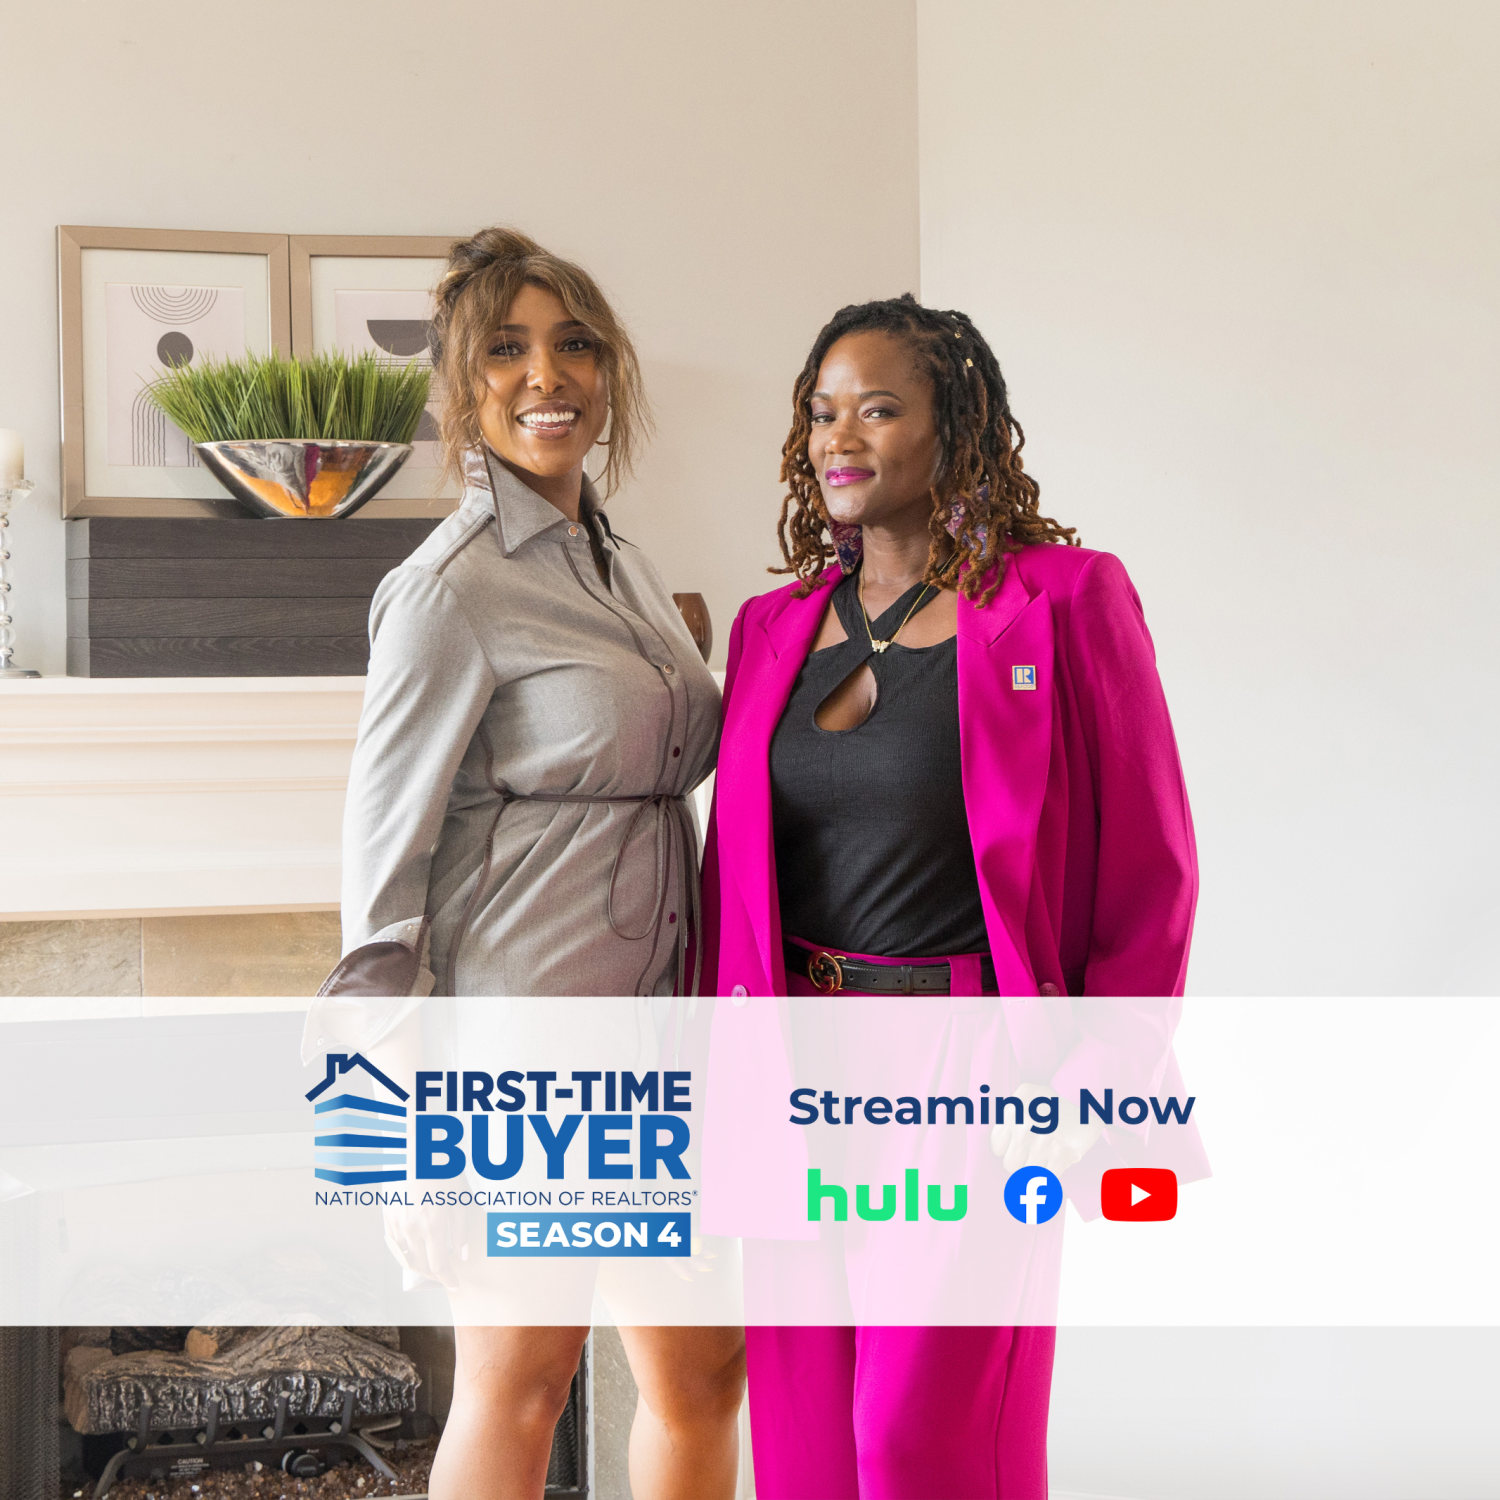 First Time Buyer Season 4 streaming now.